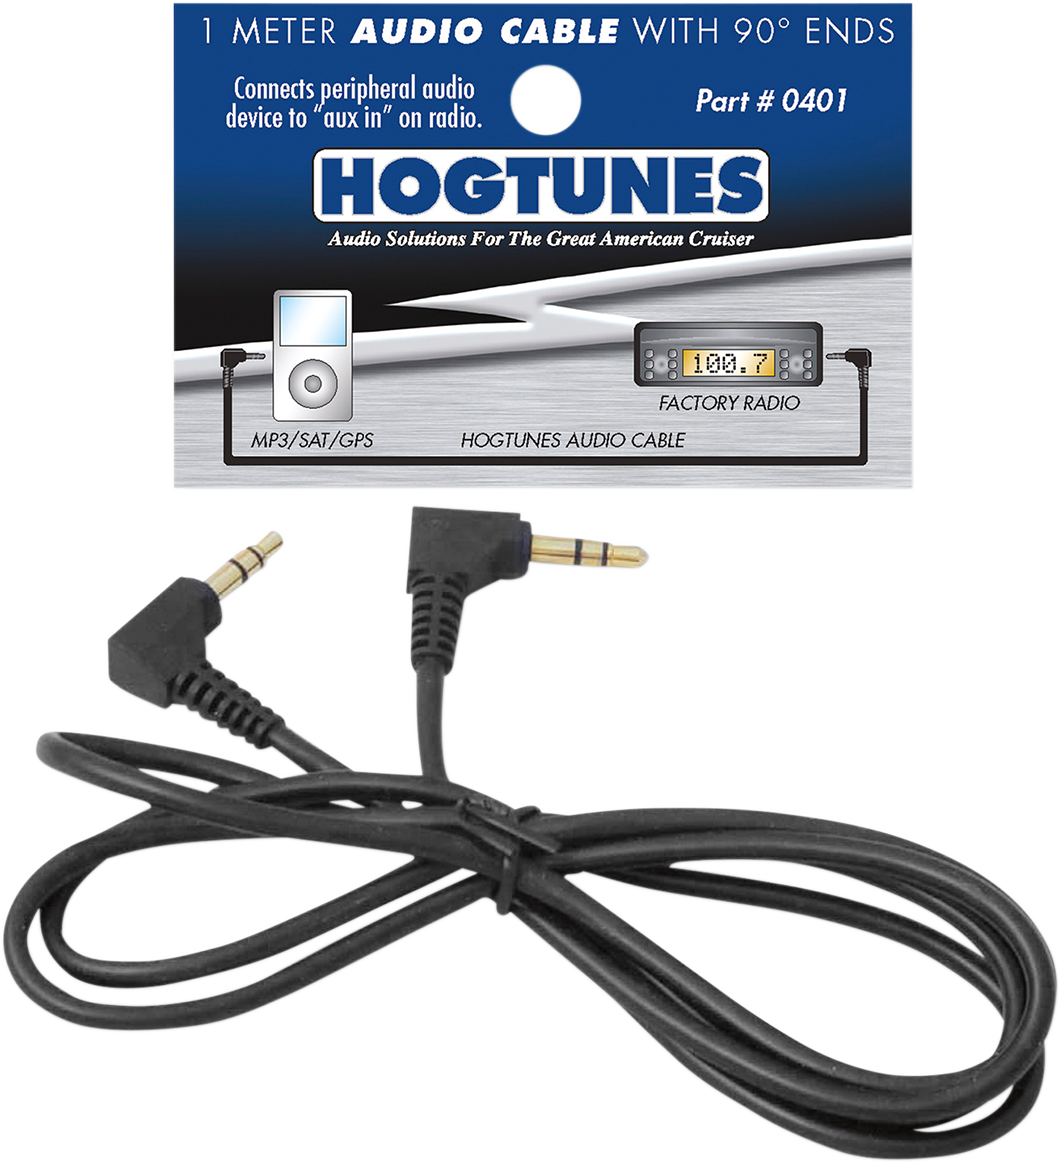 4401-0072 - HOGTUNES Radio Cable/Audio Device 0401